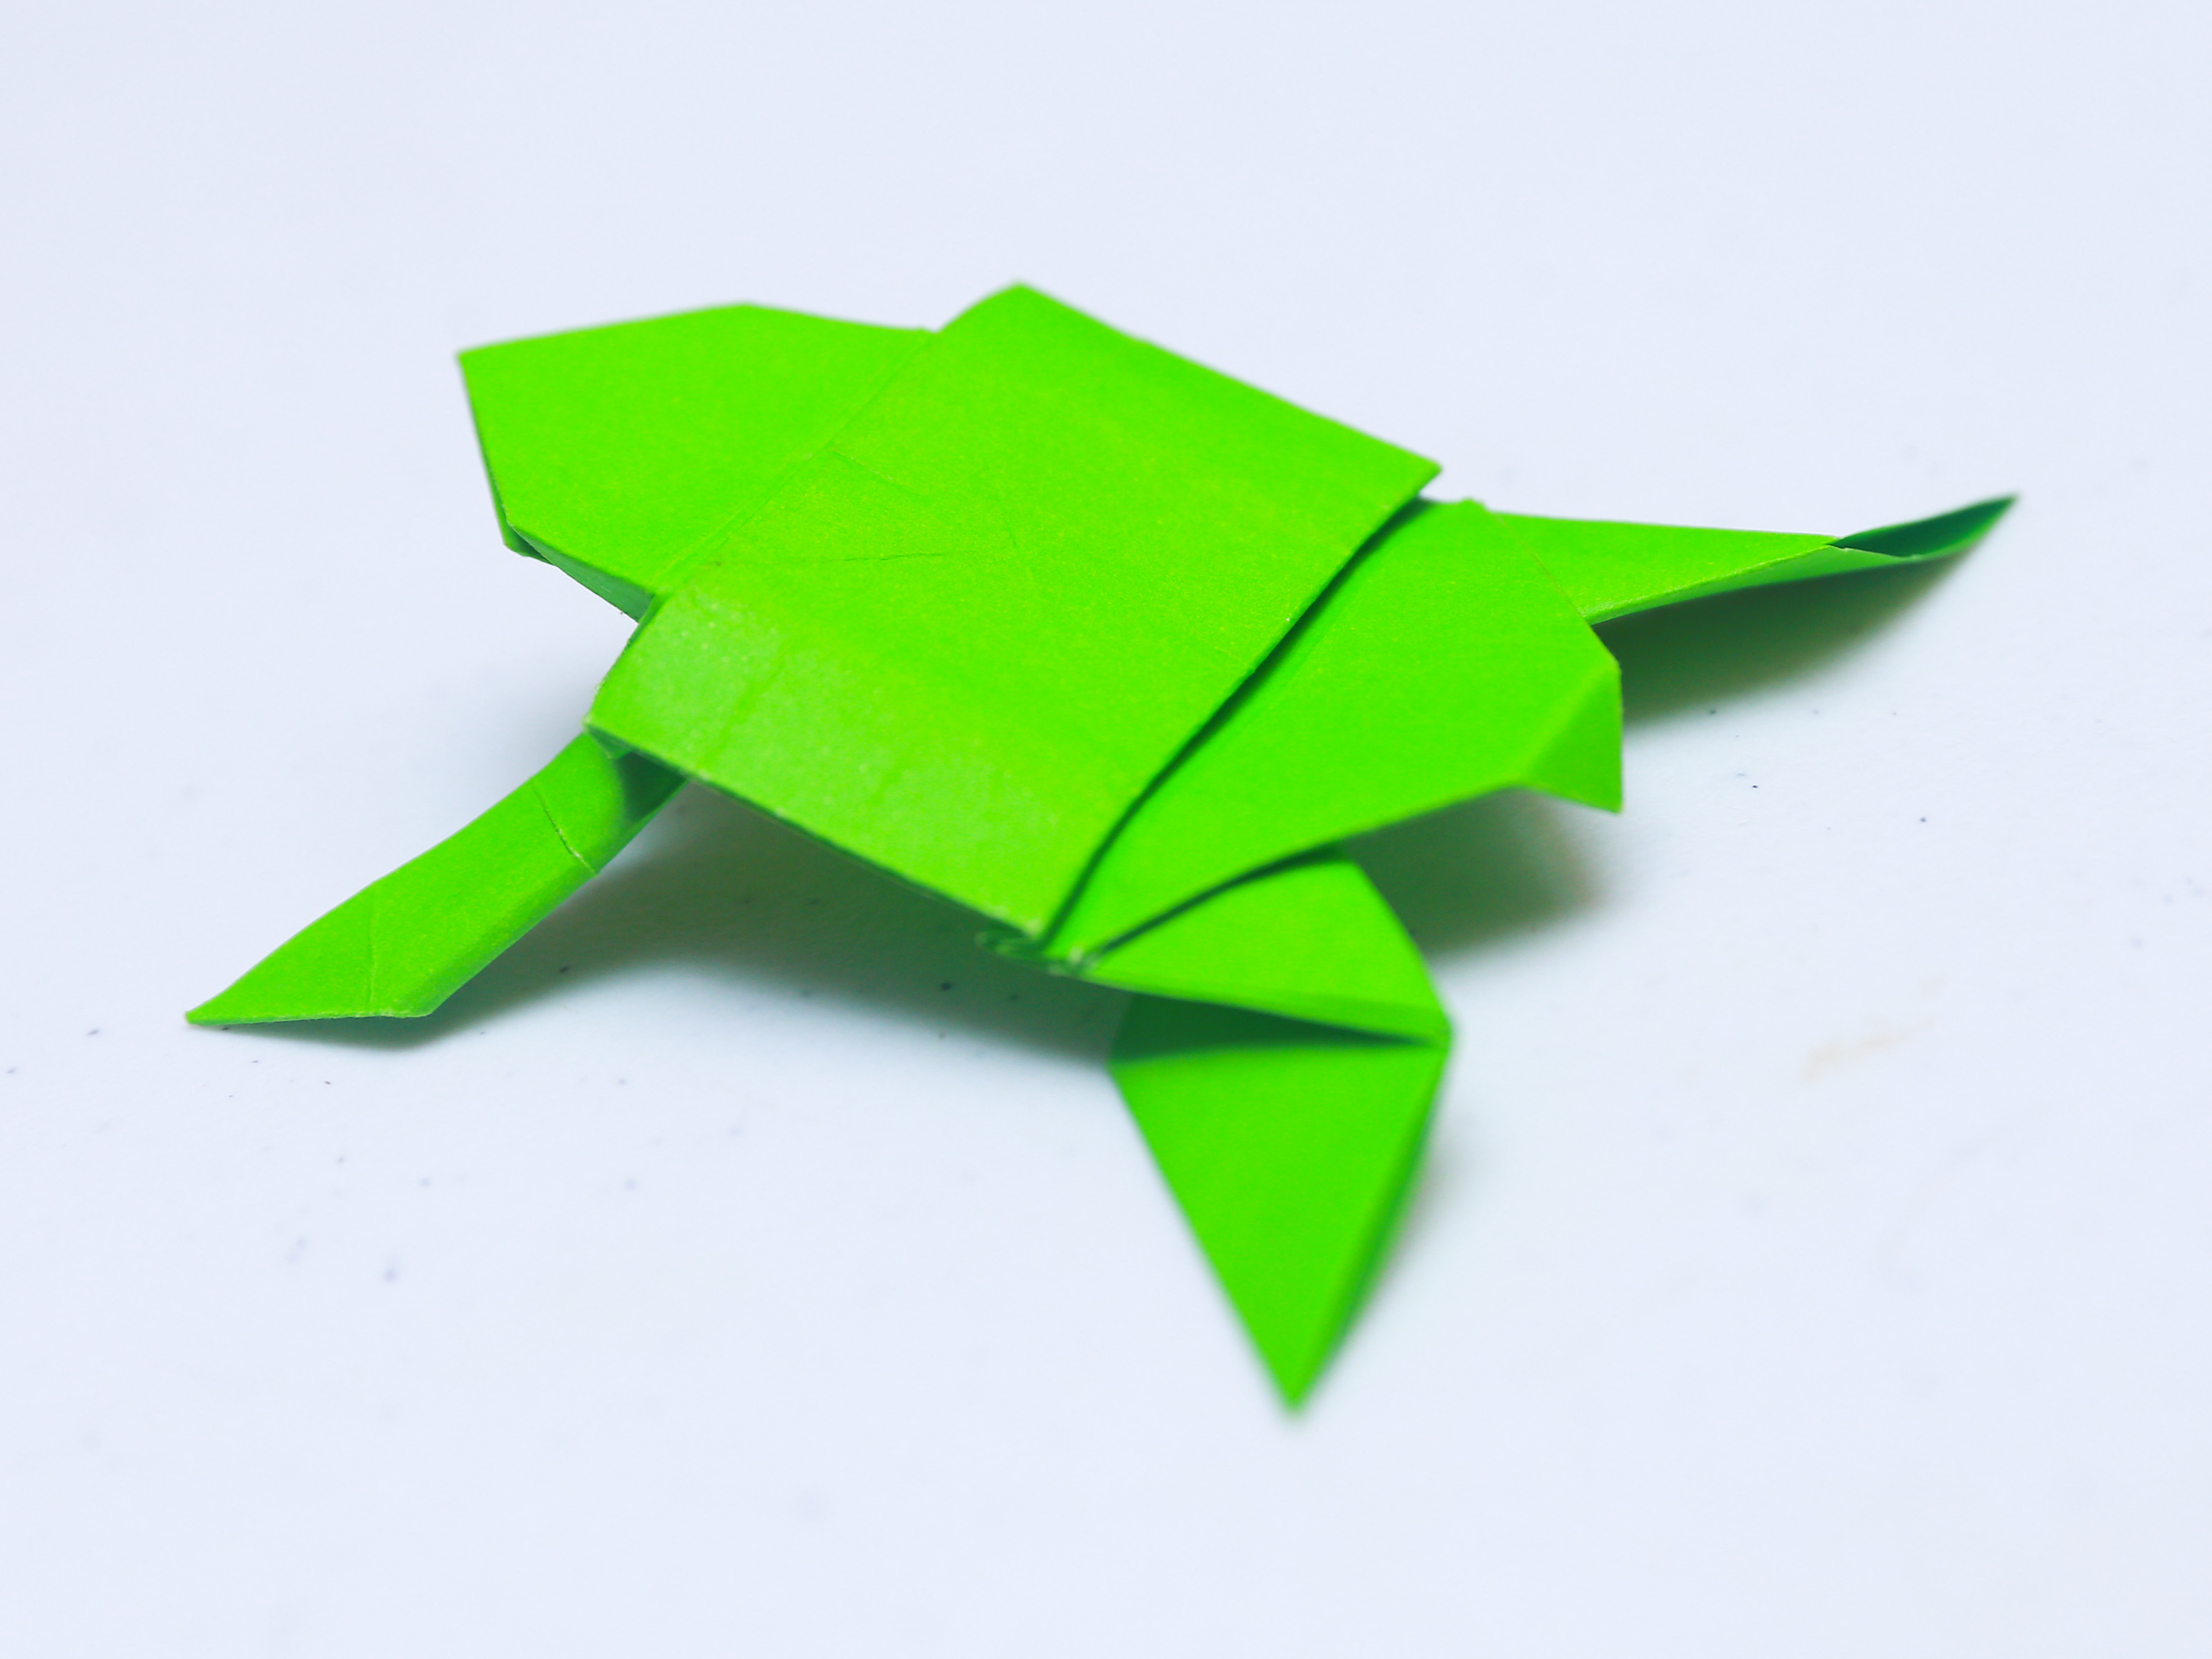 Jumping Frog Origami Origami Frog Diagram Beautiful How To Make An Origami Turtle With